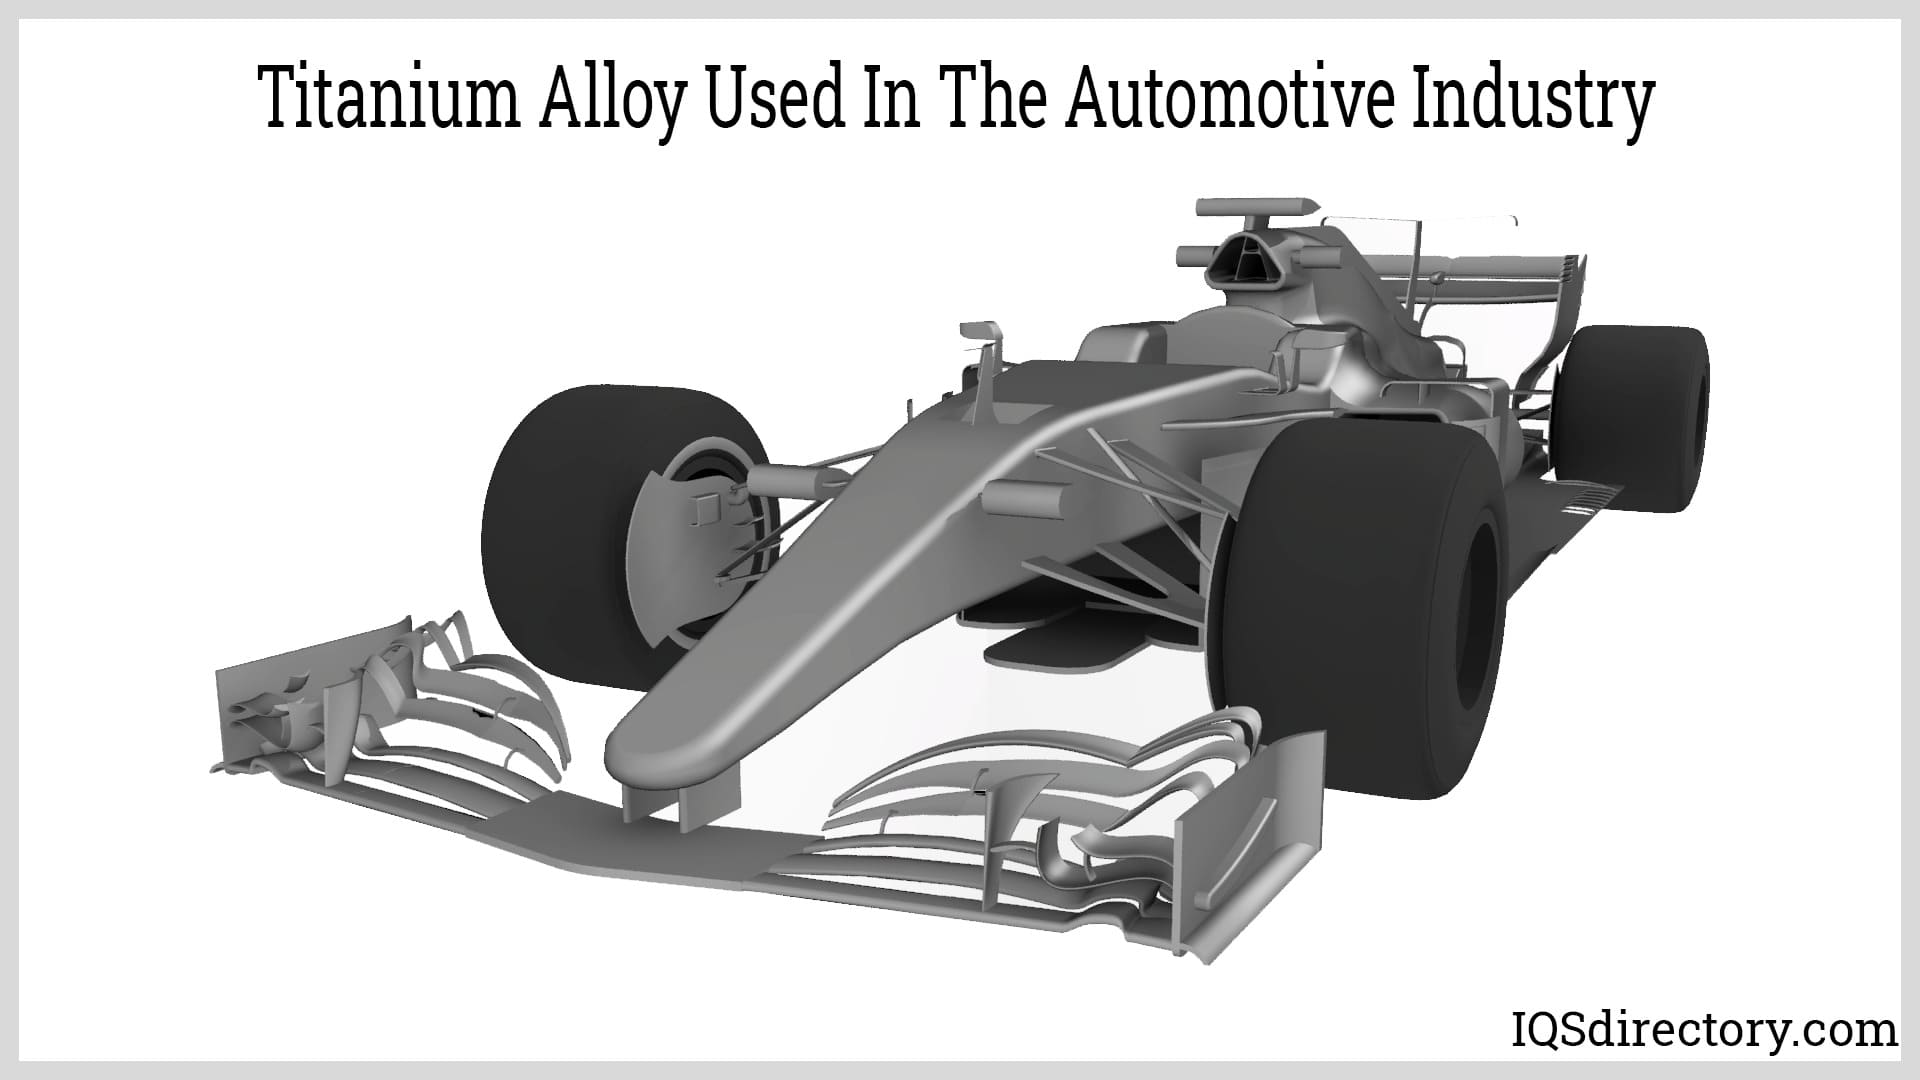 Titanium Alloy used in the Automotive Industry